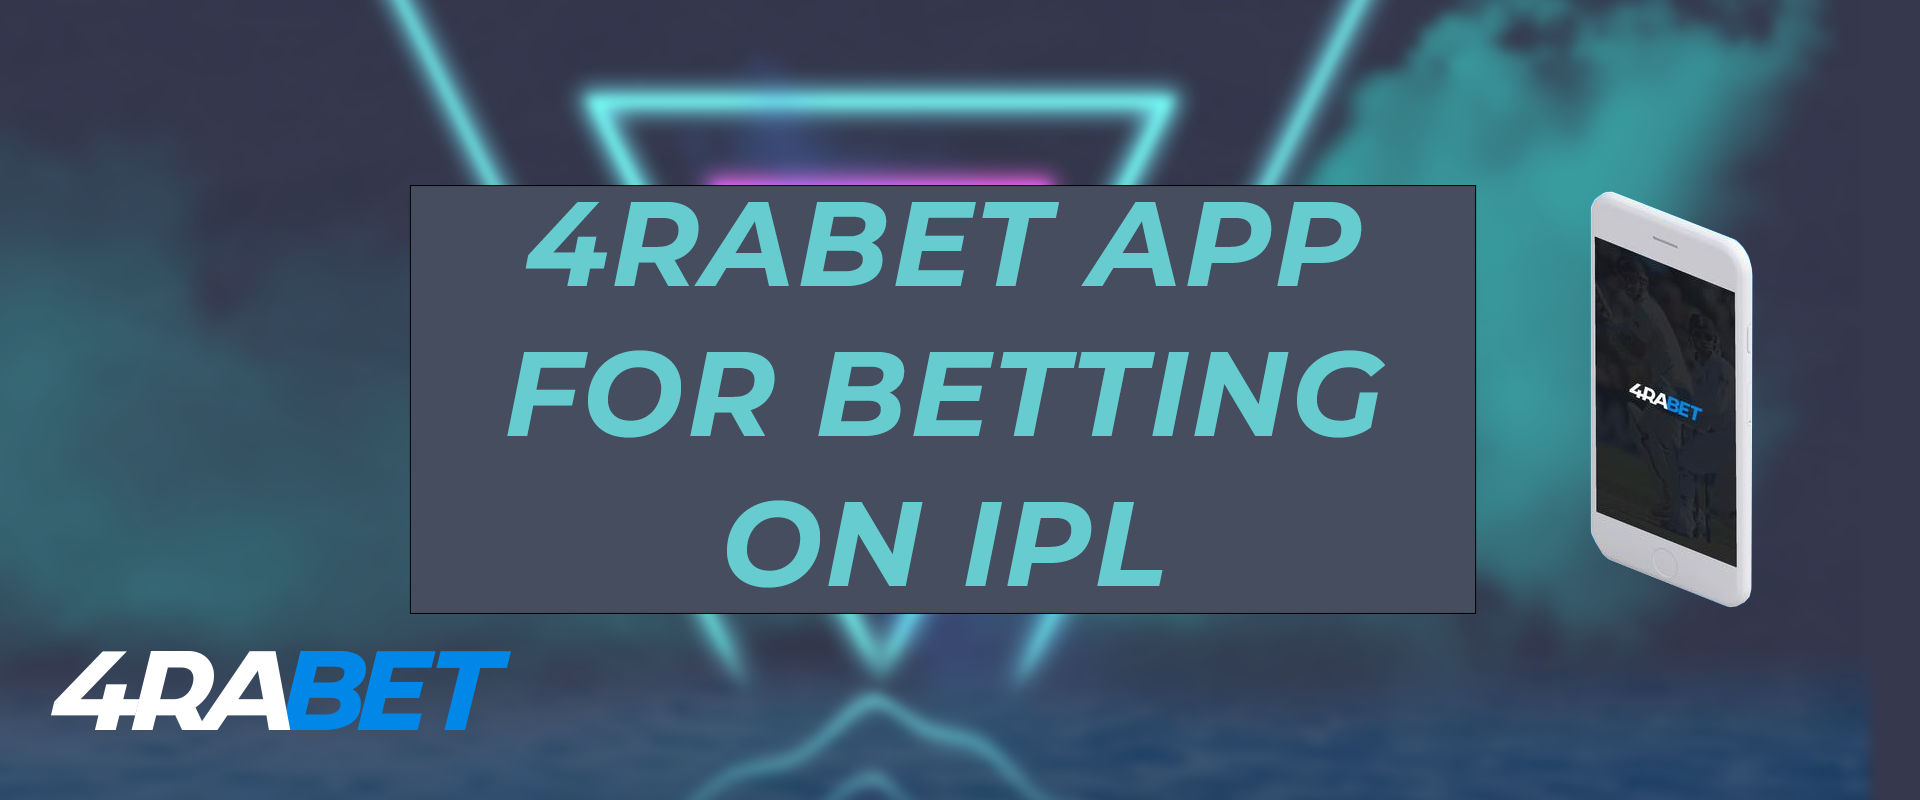 4rabet app for betting in the ipl.